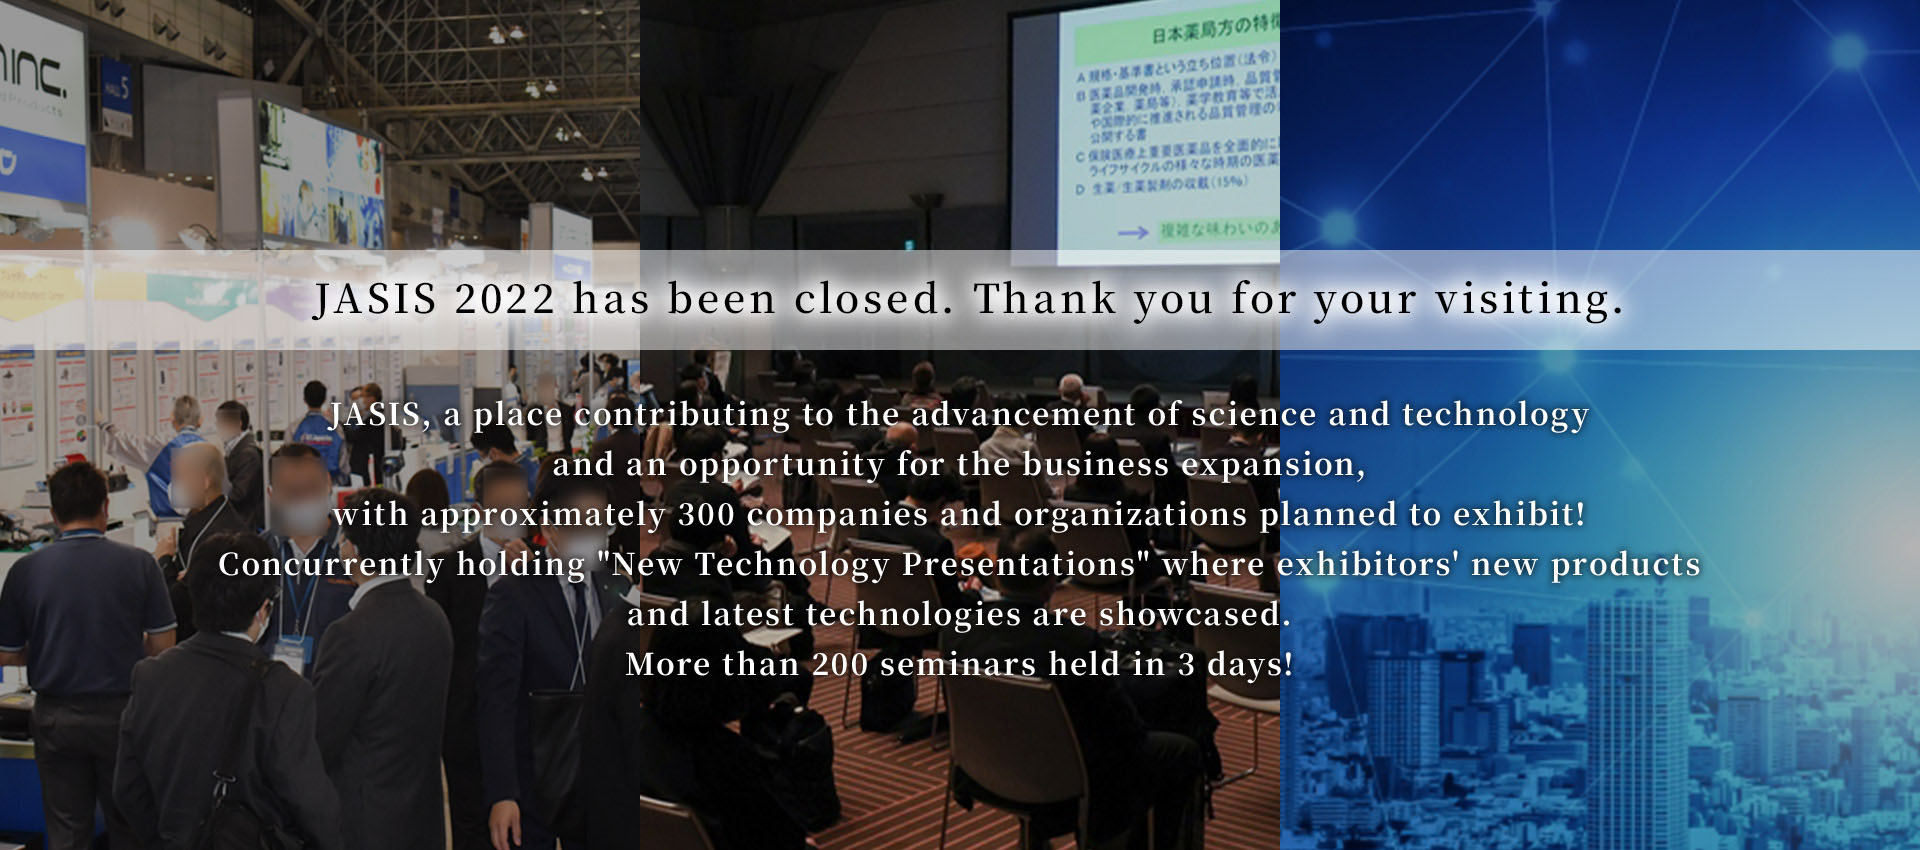 JASIS 2022 has been closed. Thank you for your visiting.